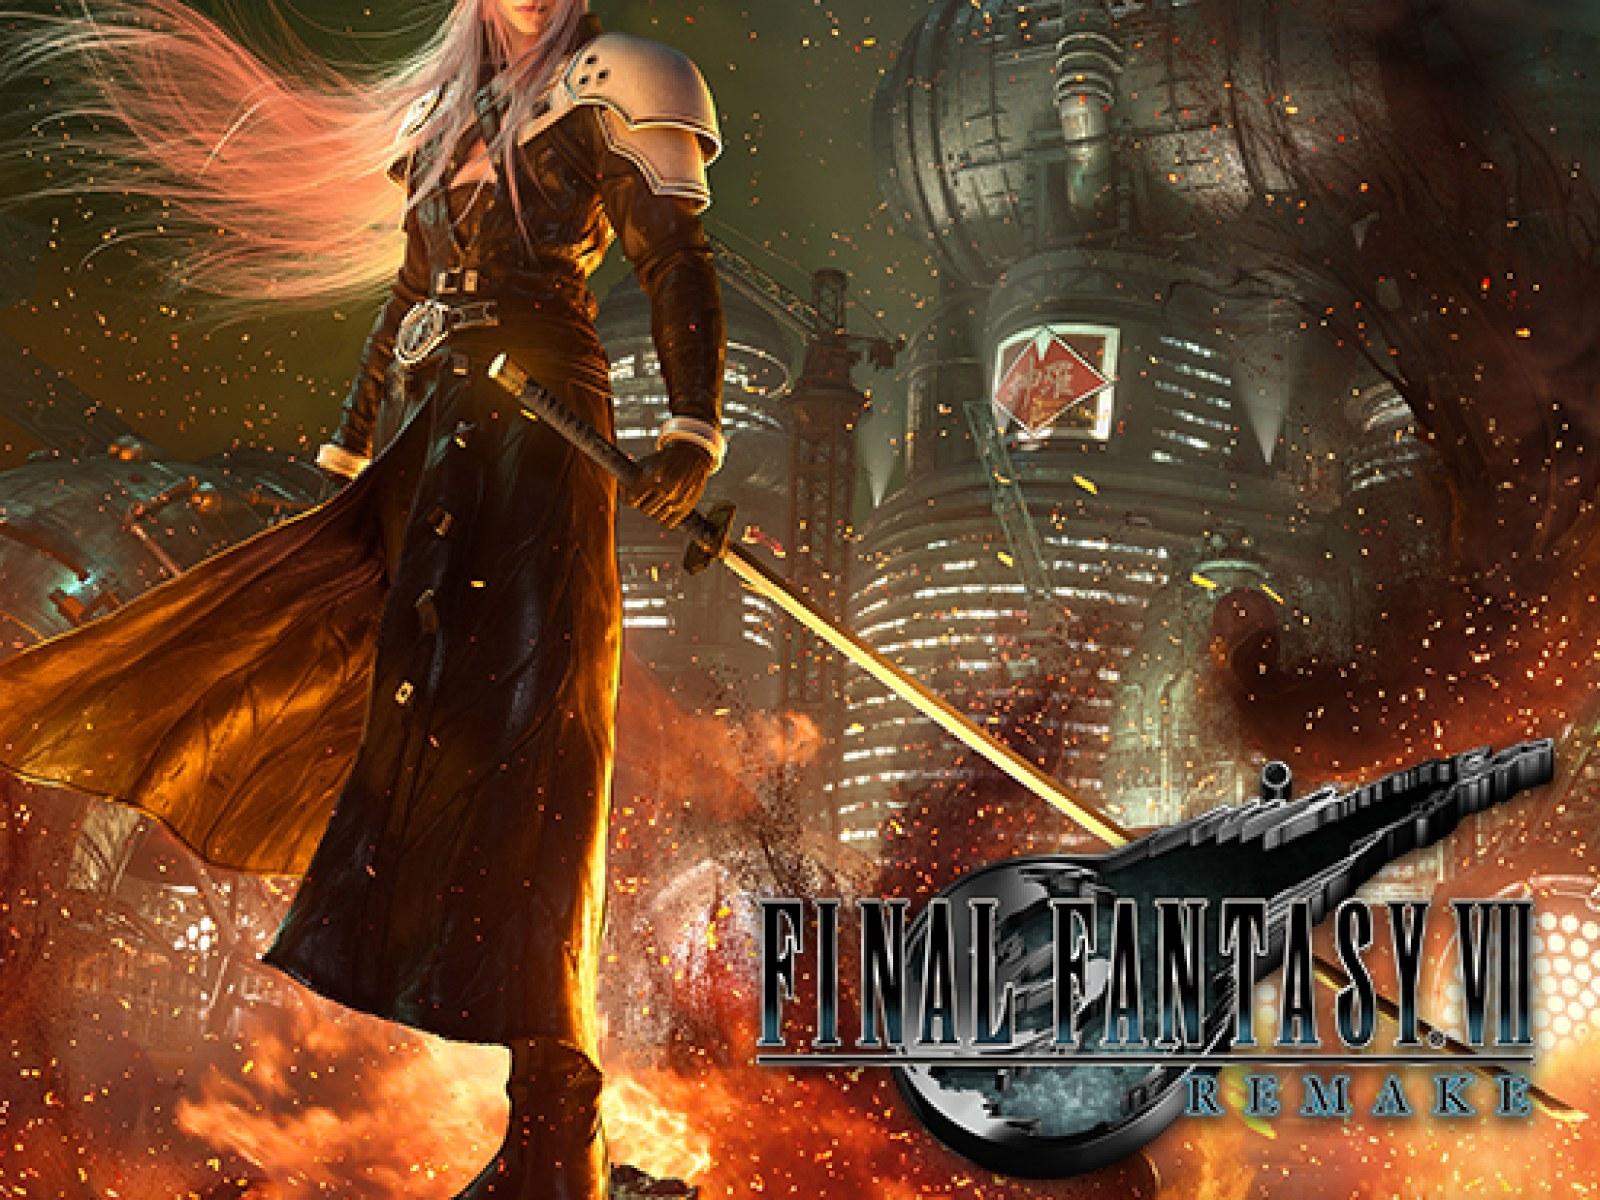 Two Key Questions About 'Final Fantasy VII Remake' Ahead of Square Enix's E3 Press Conference